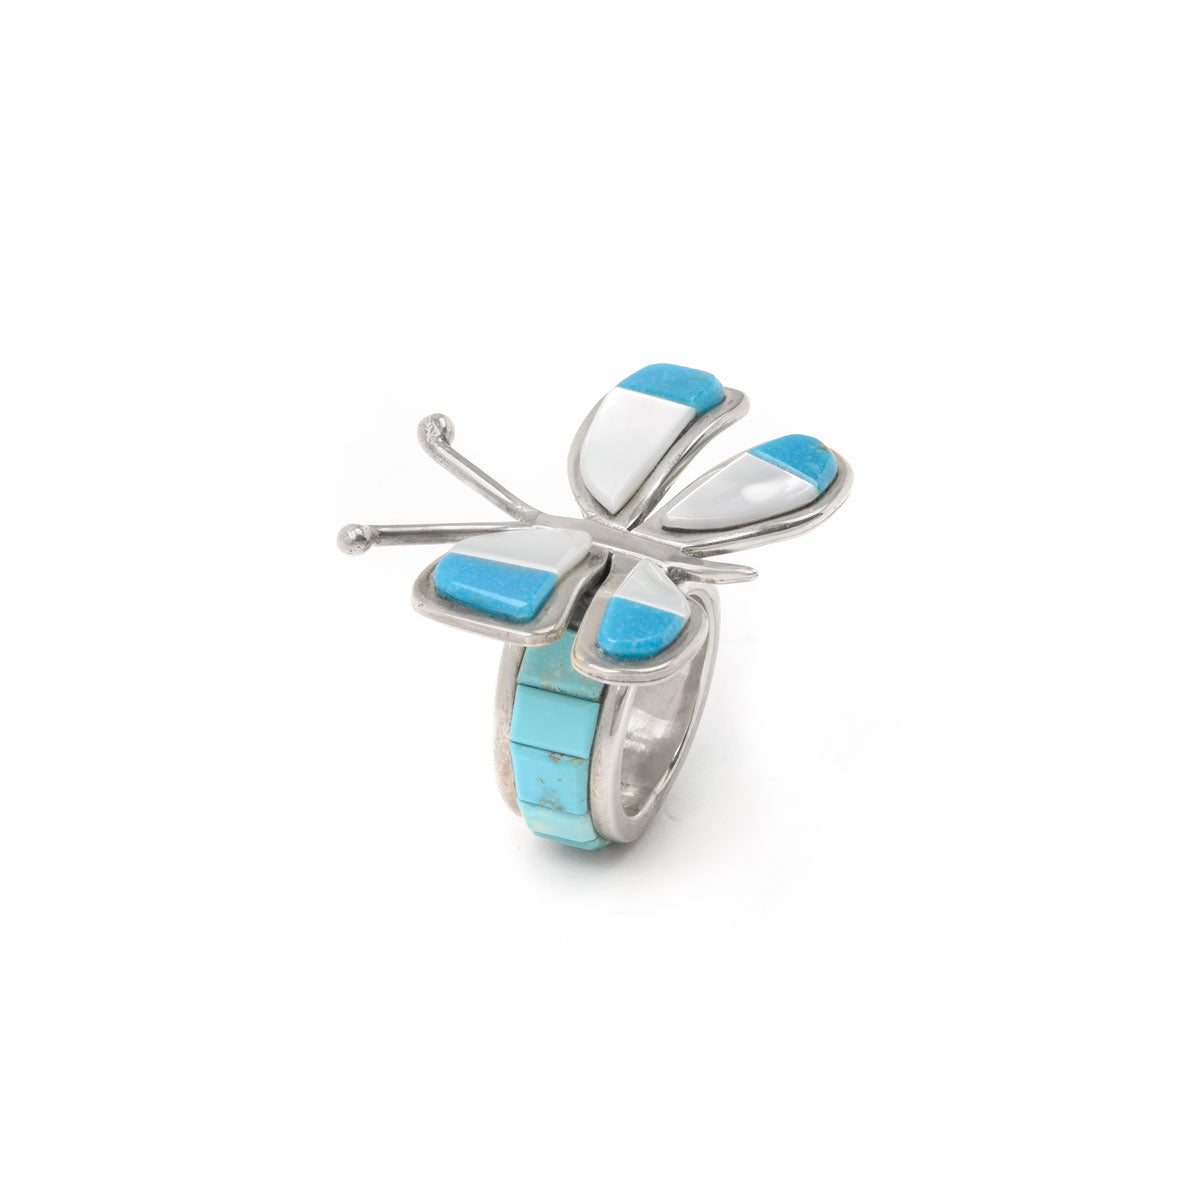 Michael Dukepoo Butterfly Inlay Ring